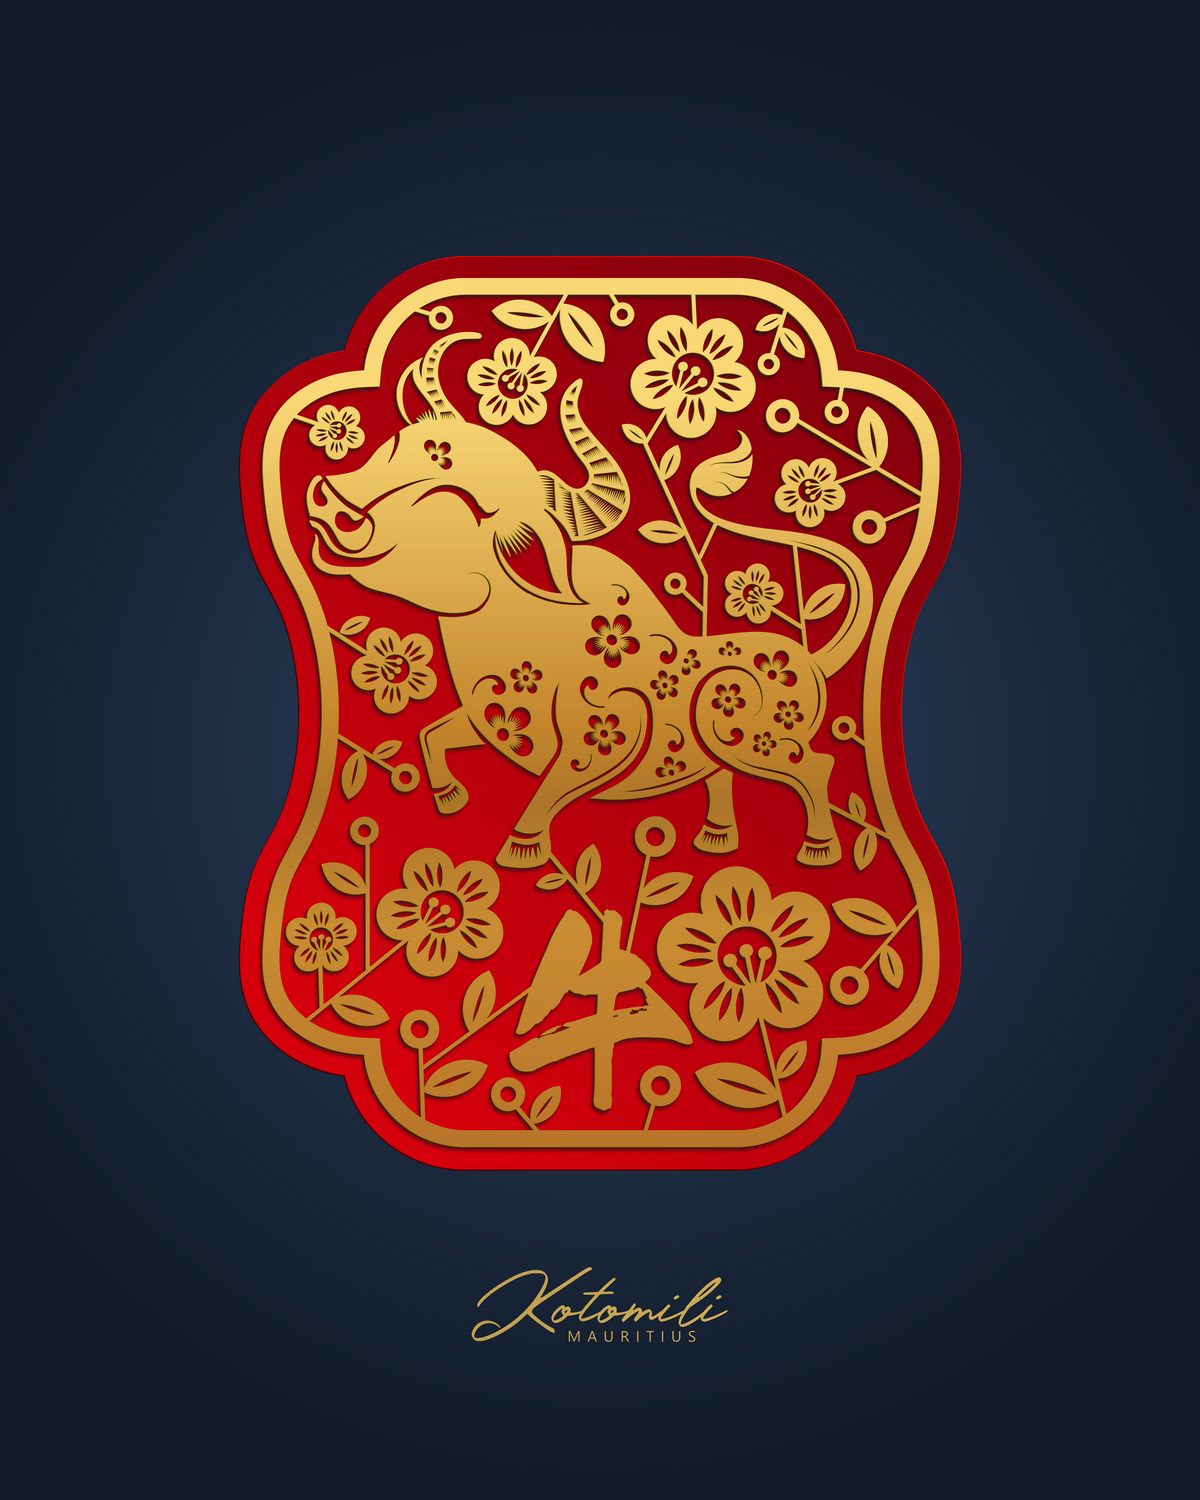 Chinese New Year of the Golden Ox by Kotomili Mauritius